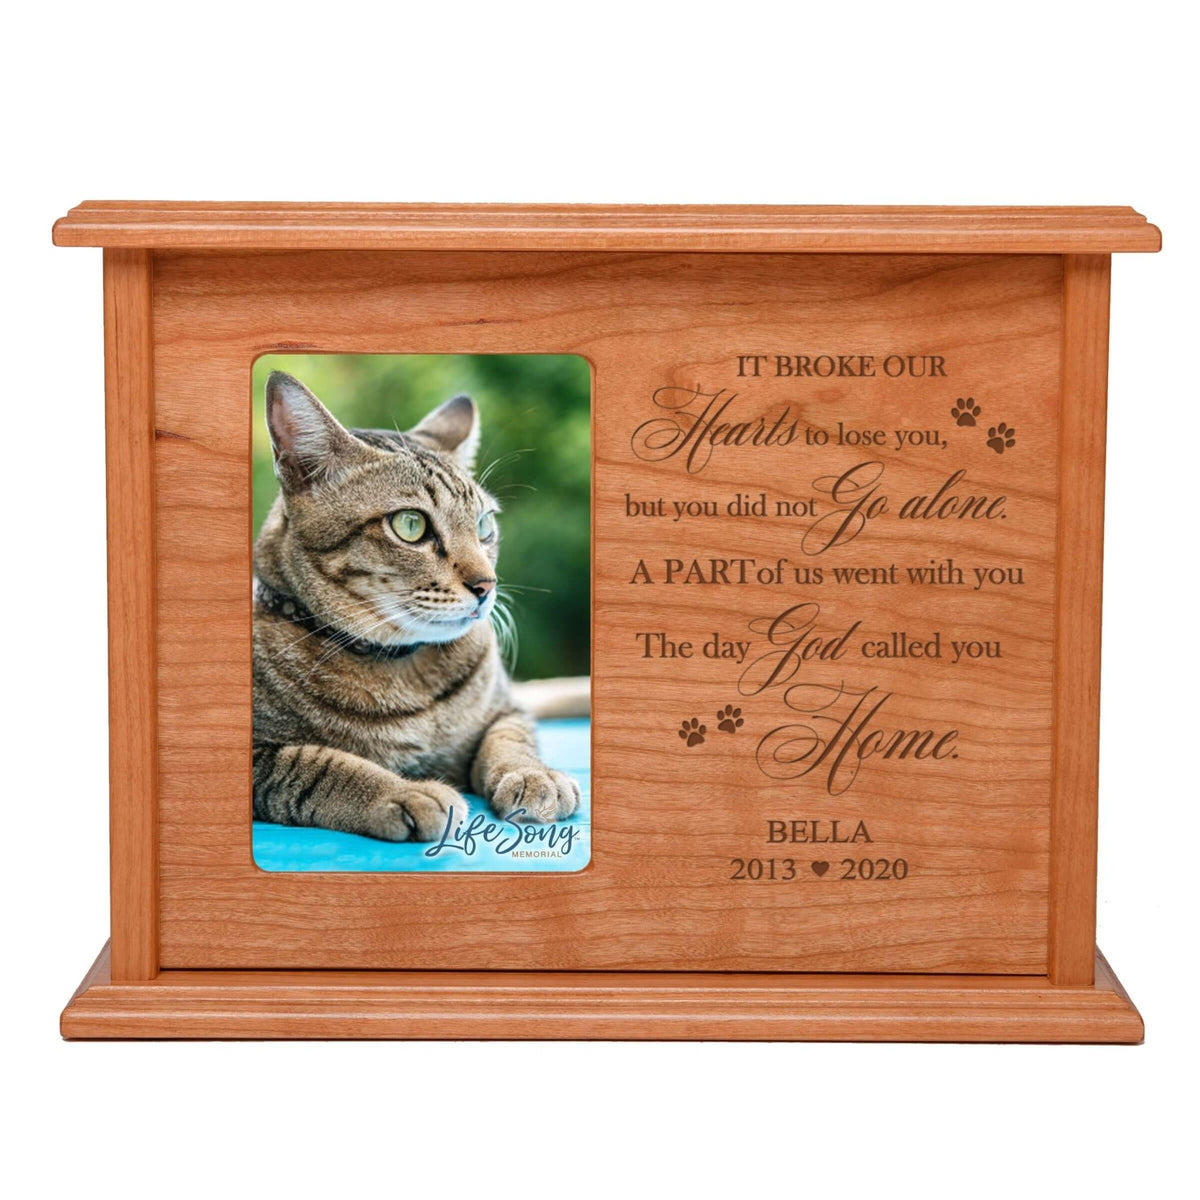 Pet Memorial Picture Cremation Urn Box for Dog or Cat - It Broke Our Hearts To Lose You - LifeSong Milestones